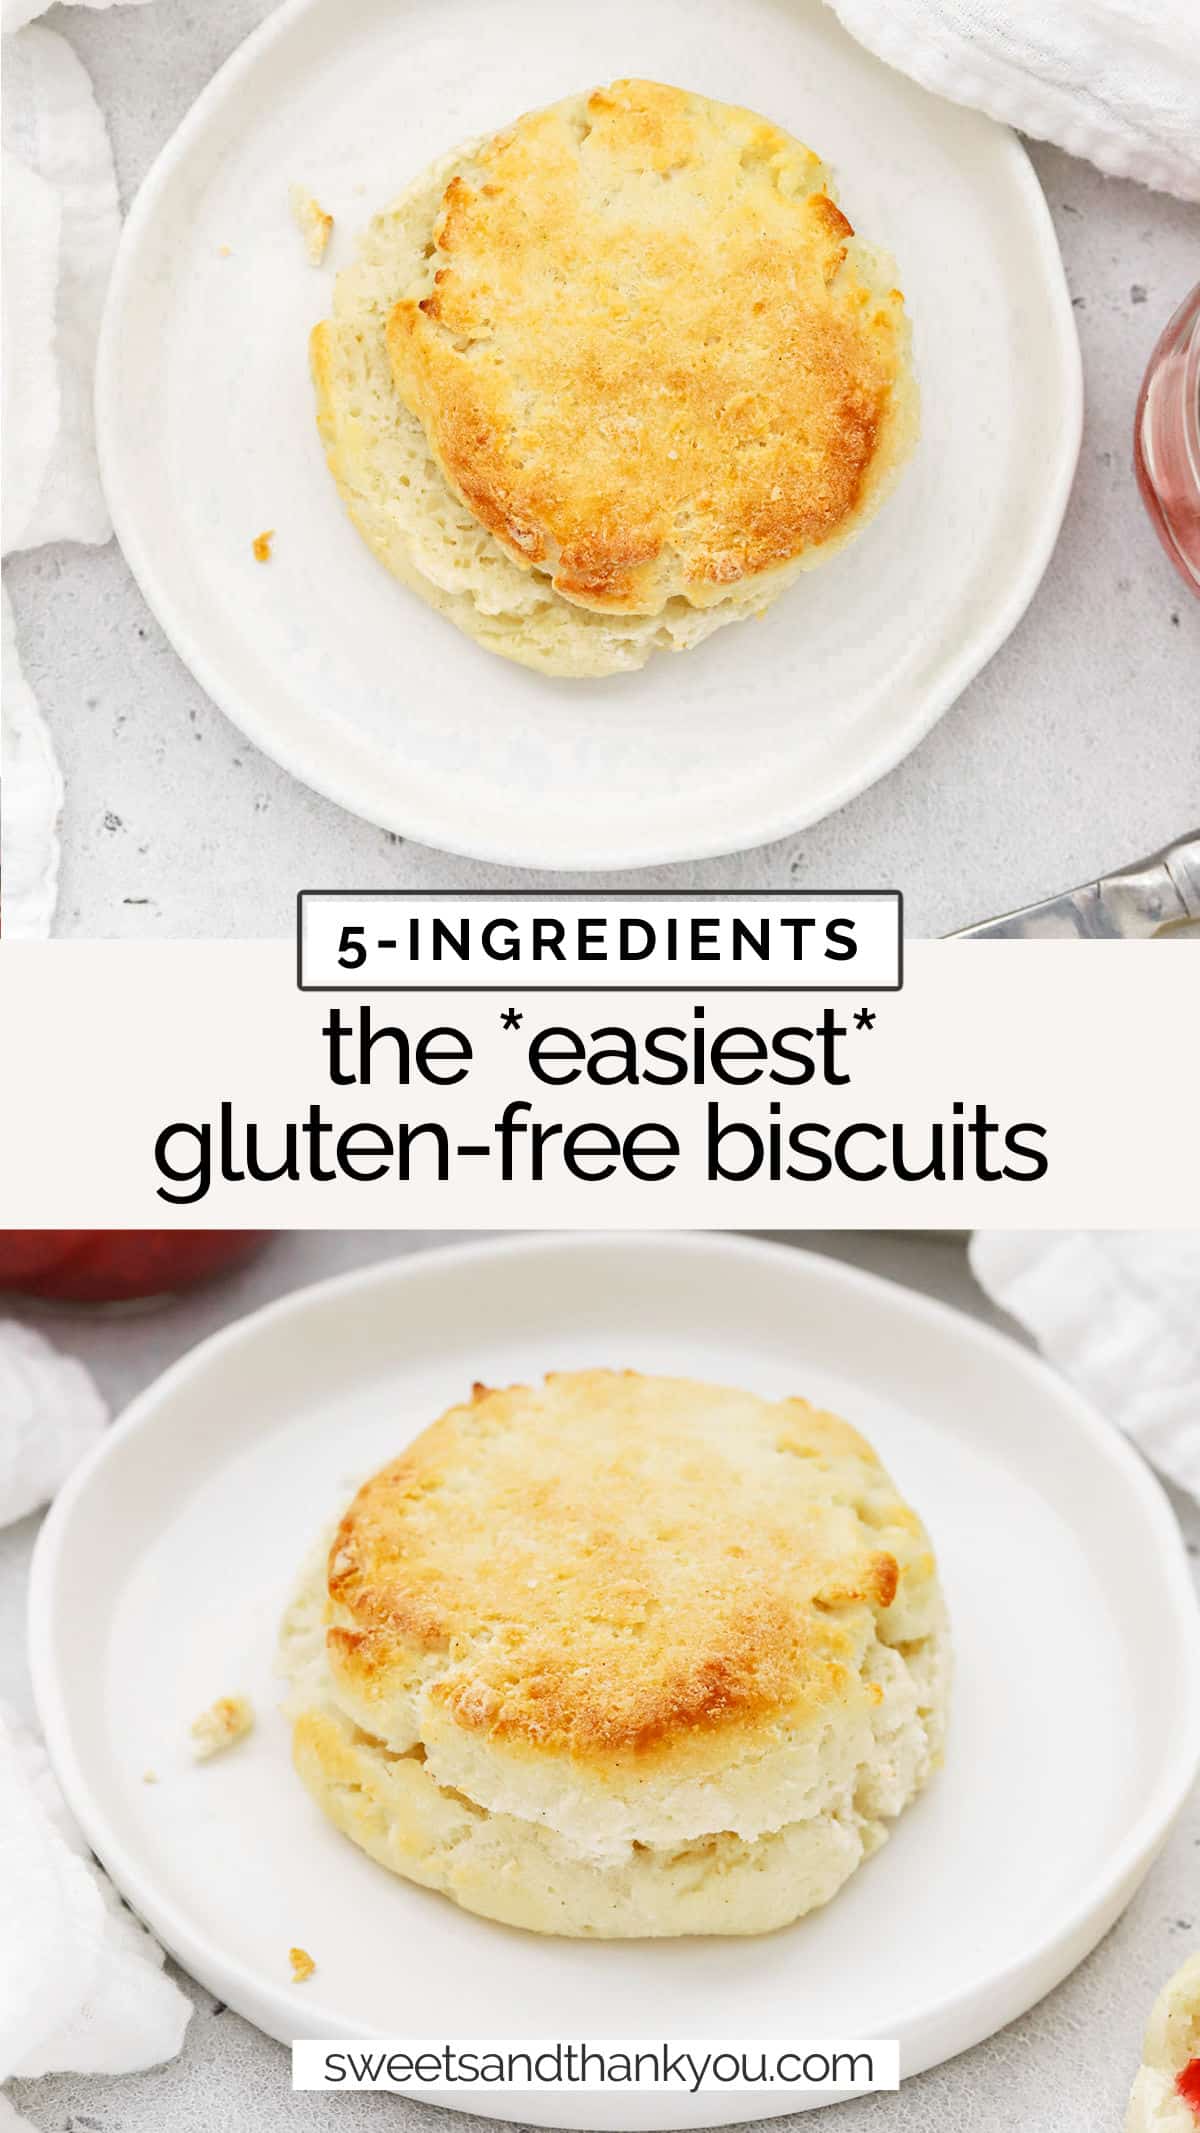 Quick & Easy Gluten-Free Biscuits - These 5-ingredient gluten-free biscuits are simple enough for beginners and are on the table in no time! // Yogurt Biscuits // Gluten Free Drop Biscuits // Easy Gluten Free Biscuit Recipe // gluten free biscuits recipe / gluten free biscuit recipe / easy biscuits / 5 ingredient gluten free biscuits / gluten free biscuits with yogurt / gluten free biscuits and gravy / gluten free brunch recipe / gluten free breakfast